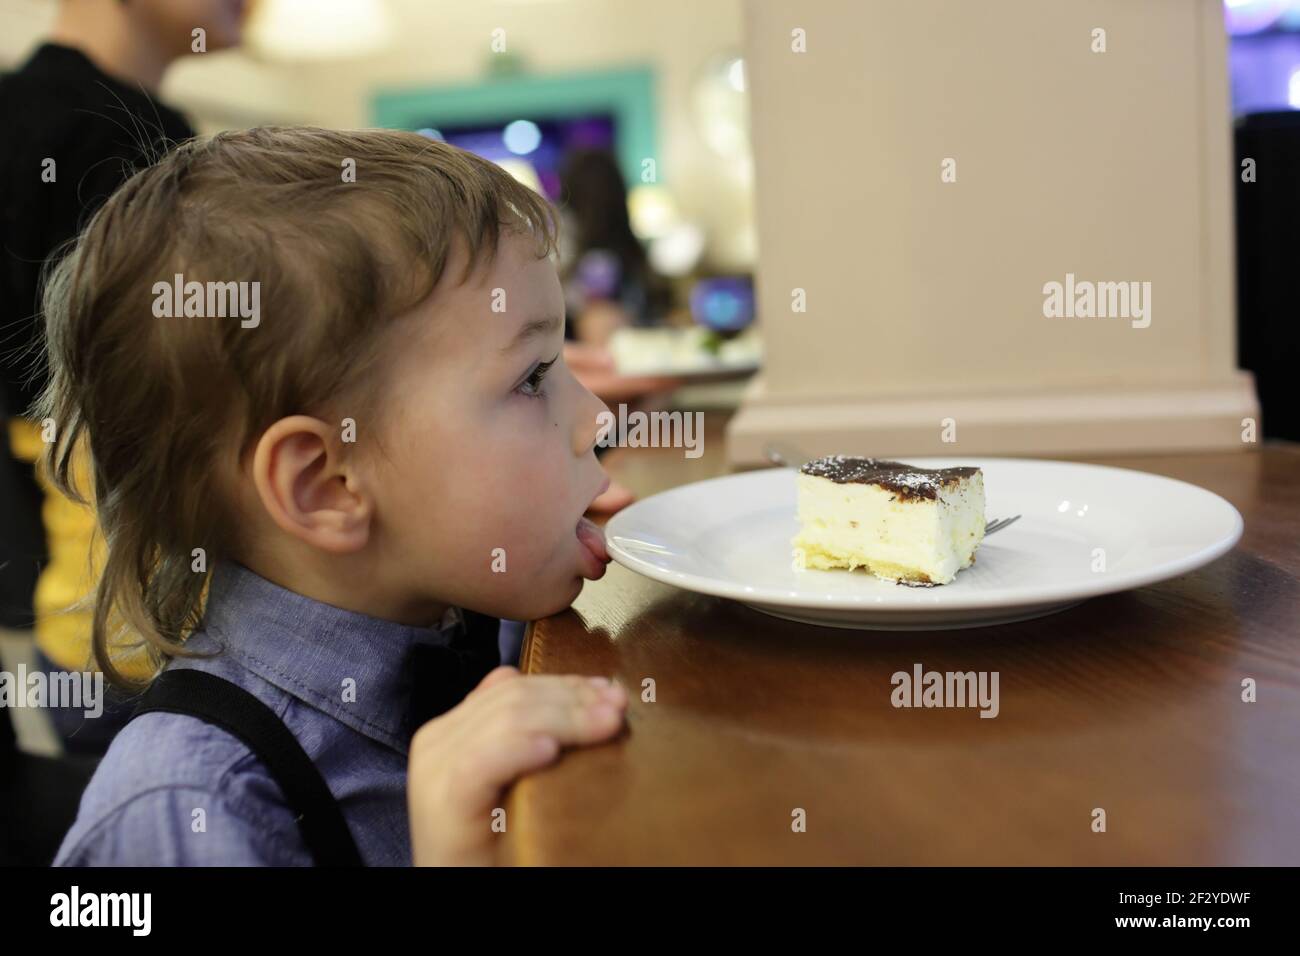 Kid licking plate with cake in the cafe Stock Photo